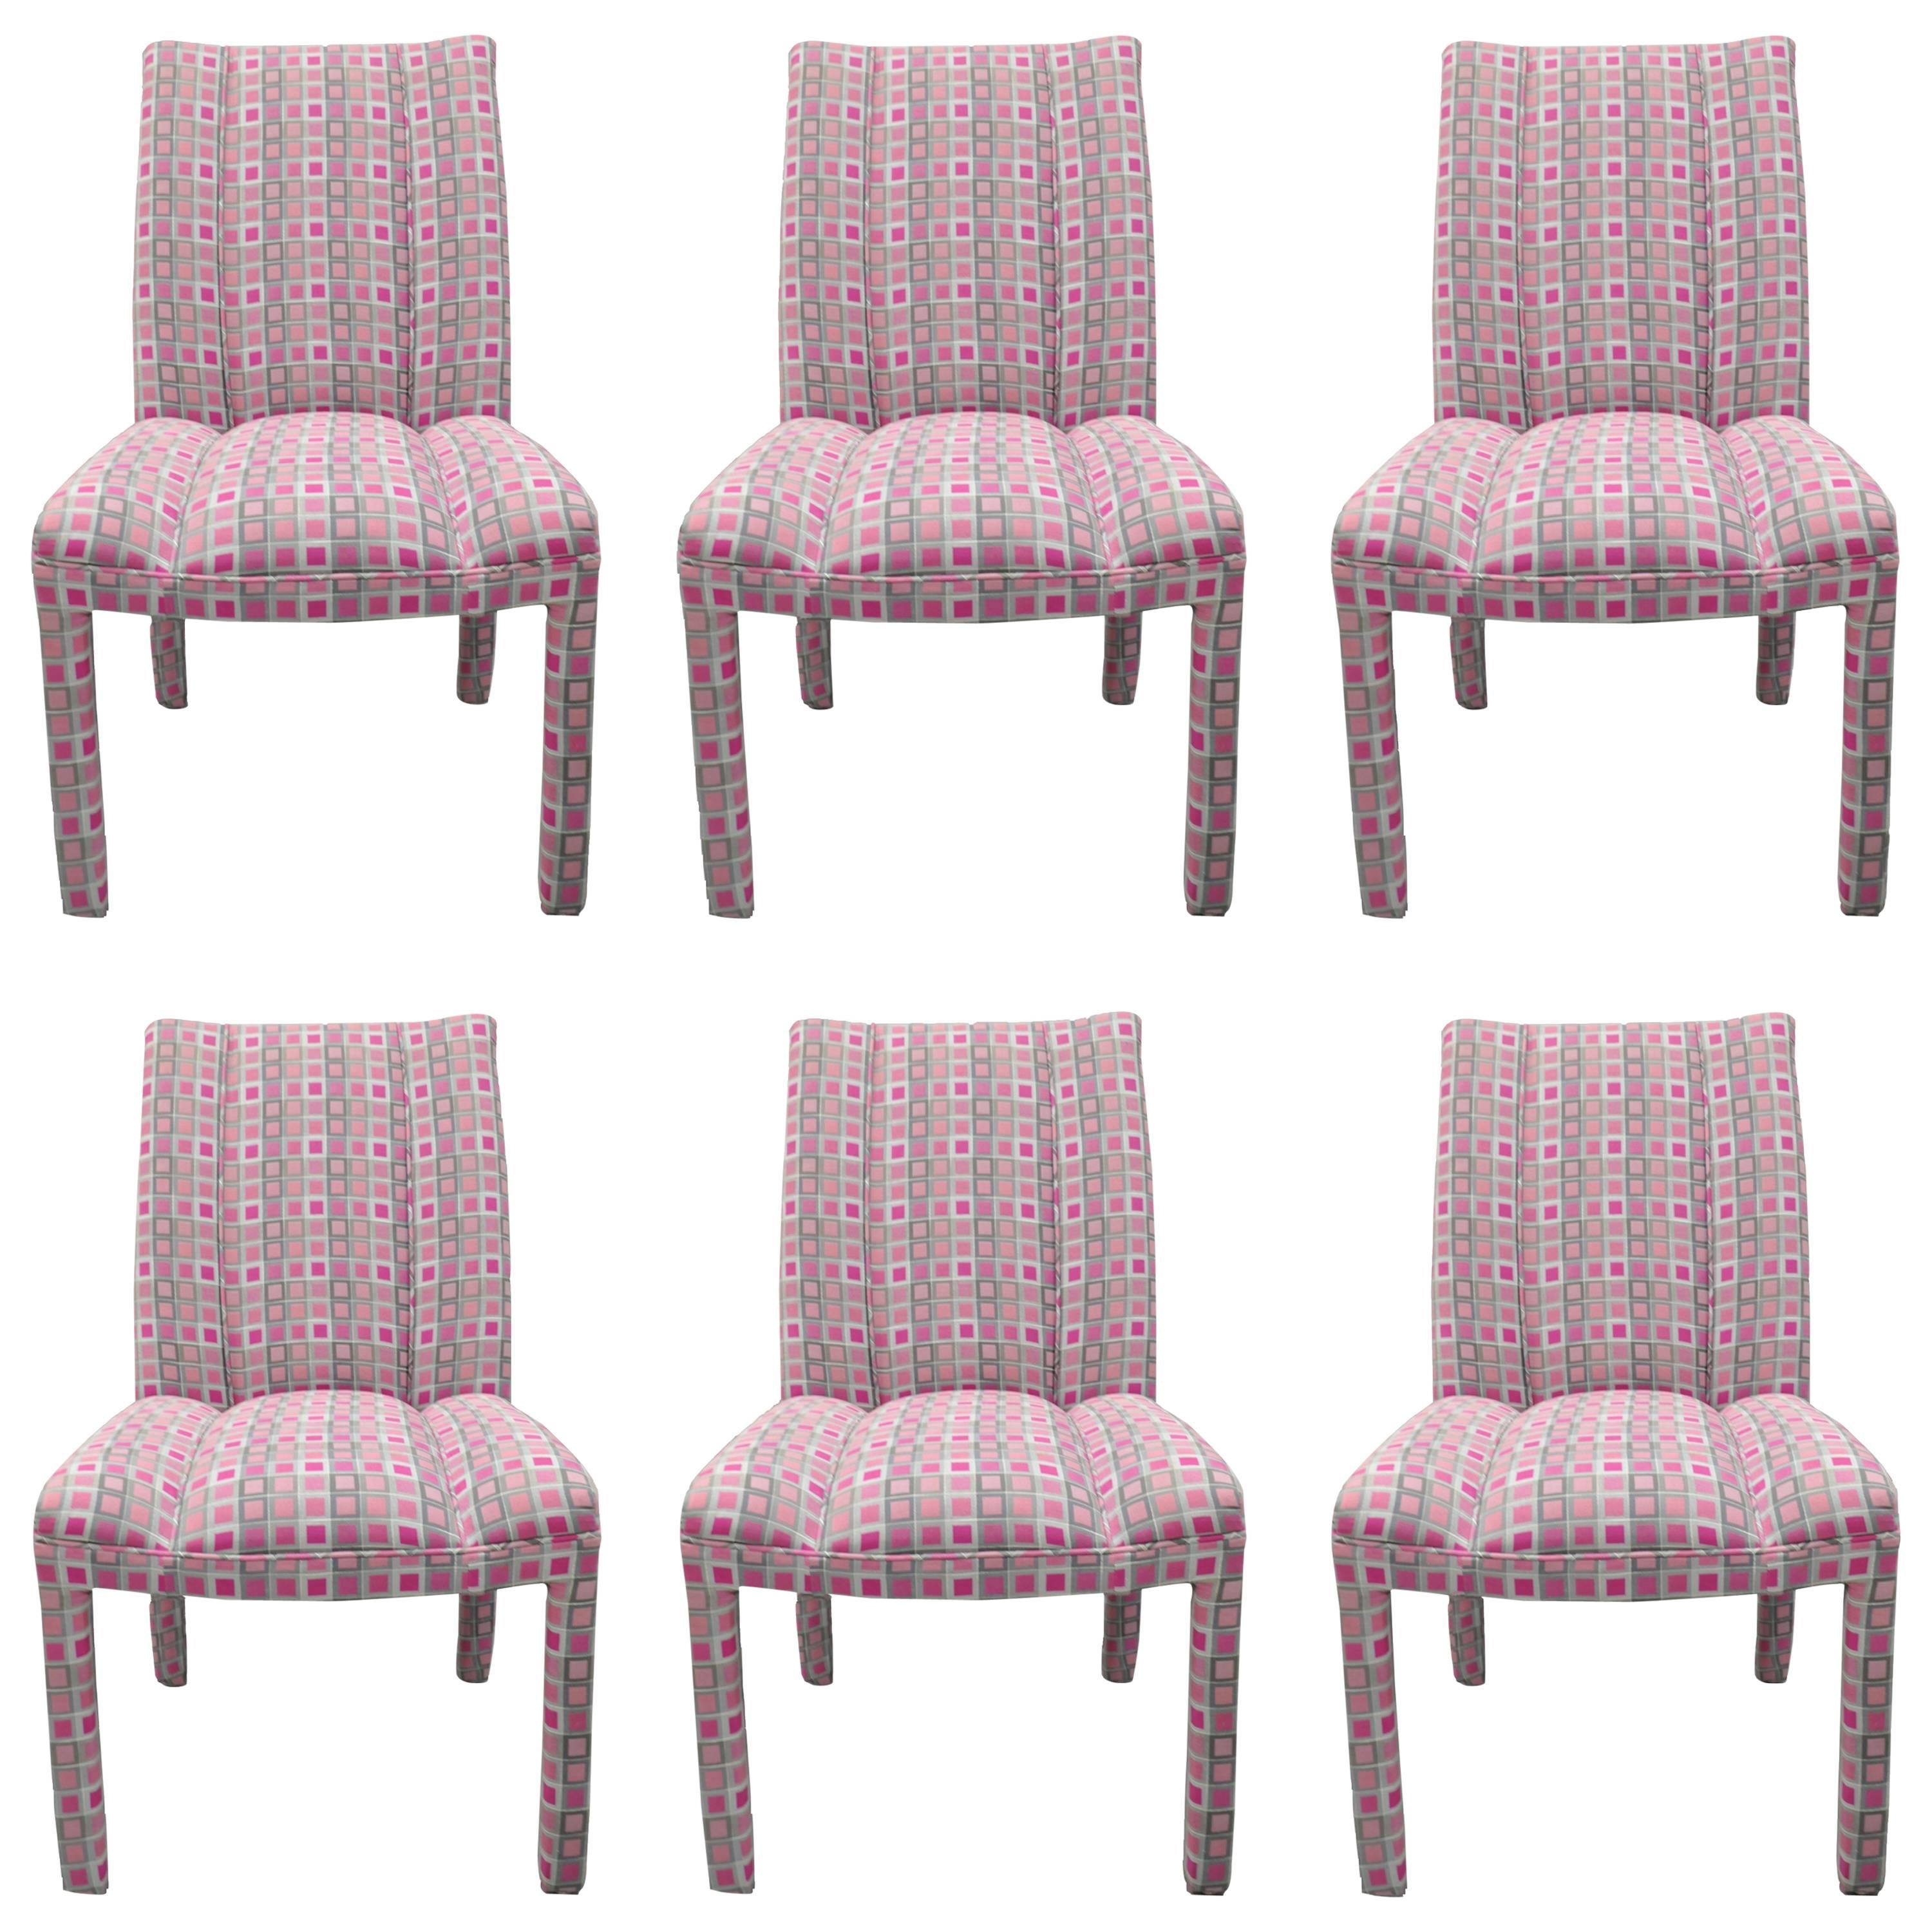 Six Upholstered Parsons Style Dining Chairs Hollywood Regency Pink and Sliver